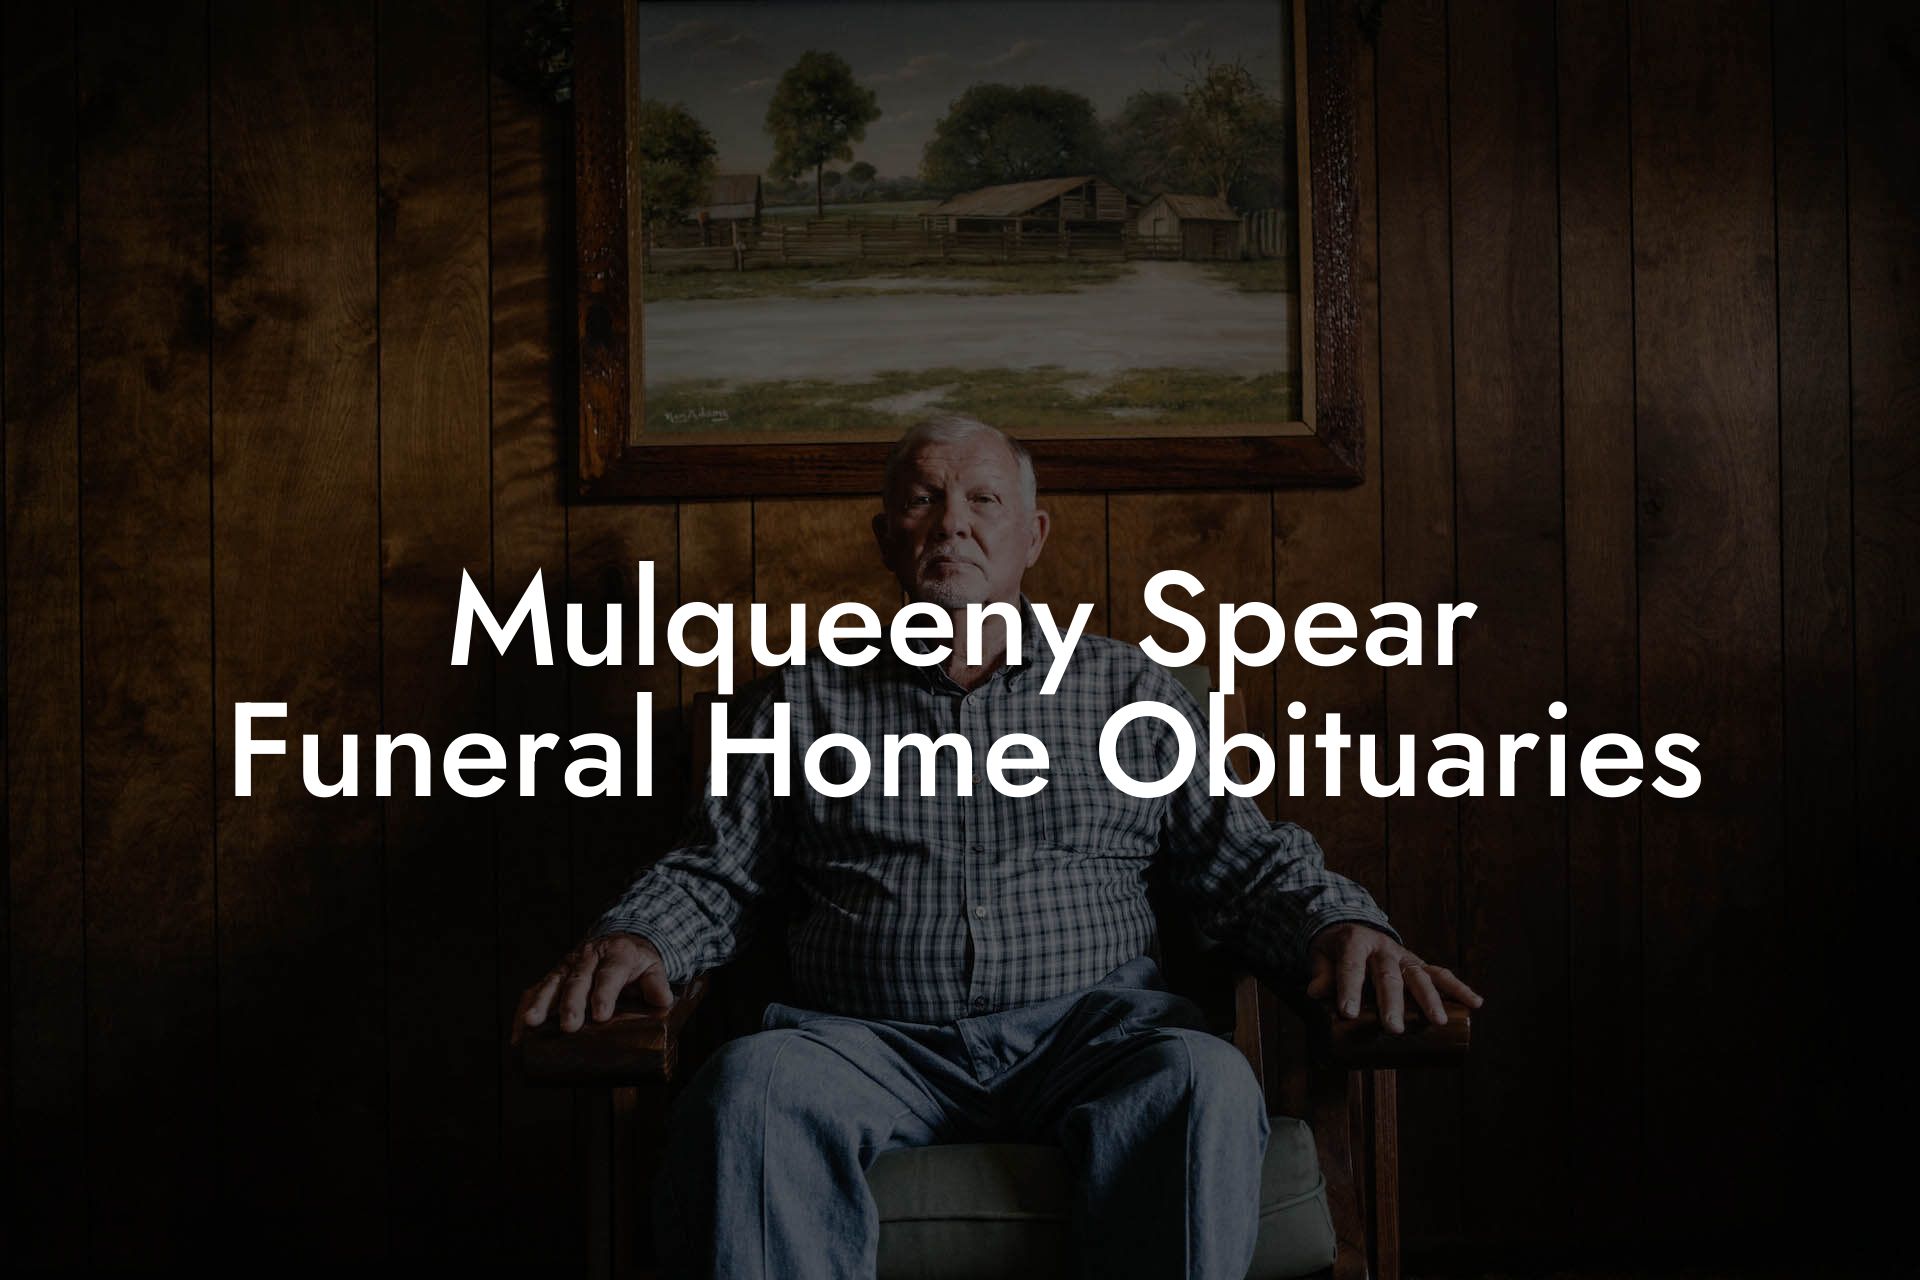 Mulqueeny Spear Funeral Home Obituaries